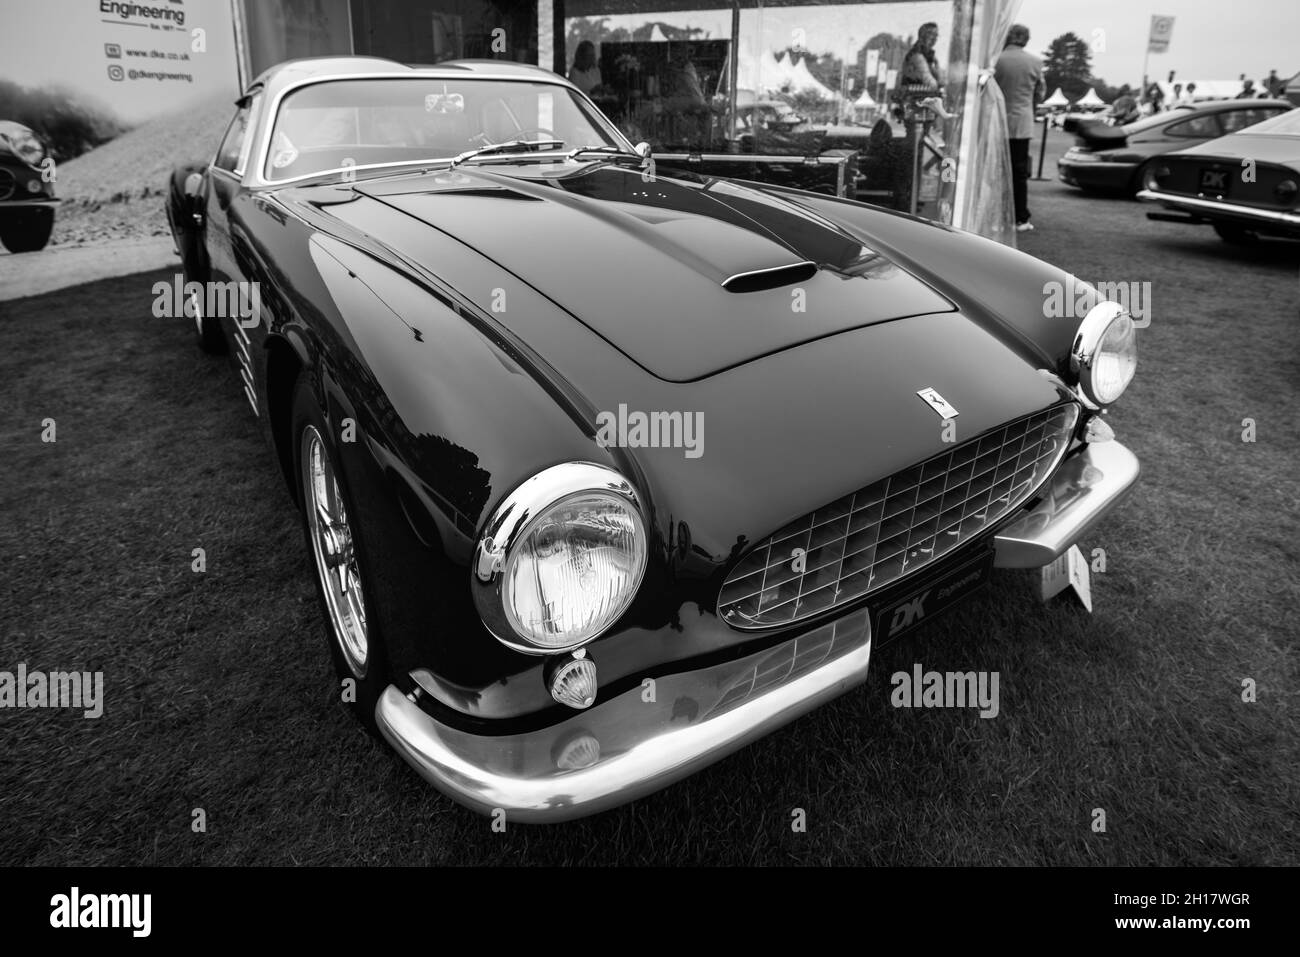 1957 Ferrari 250 GT LWB Berlinetta by Zagato, on display at the Concours d’Elegance held at Blenheim Palace on the 5th September 2021 Stock Photo